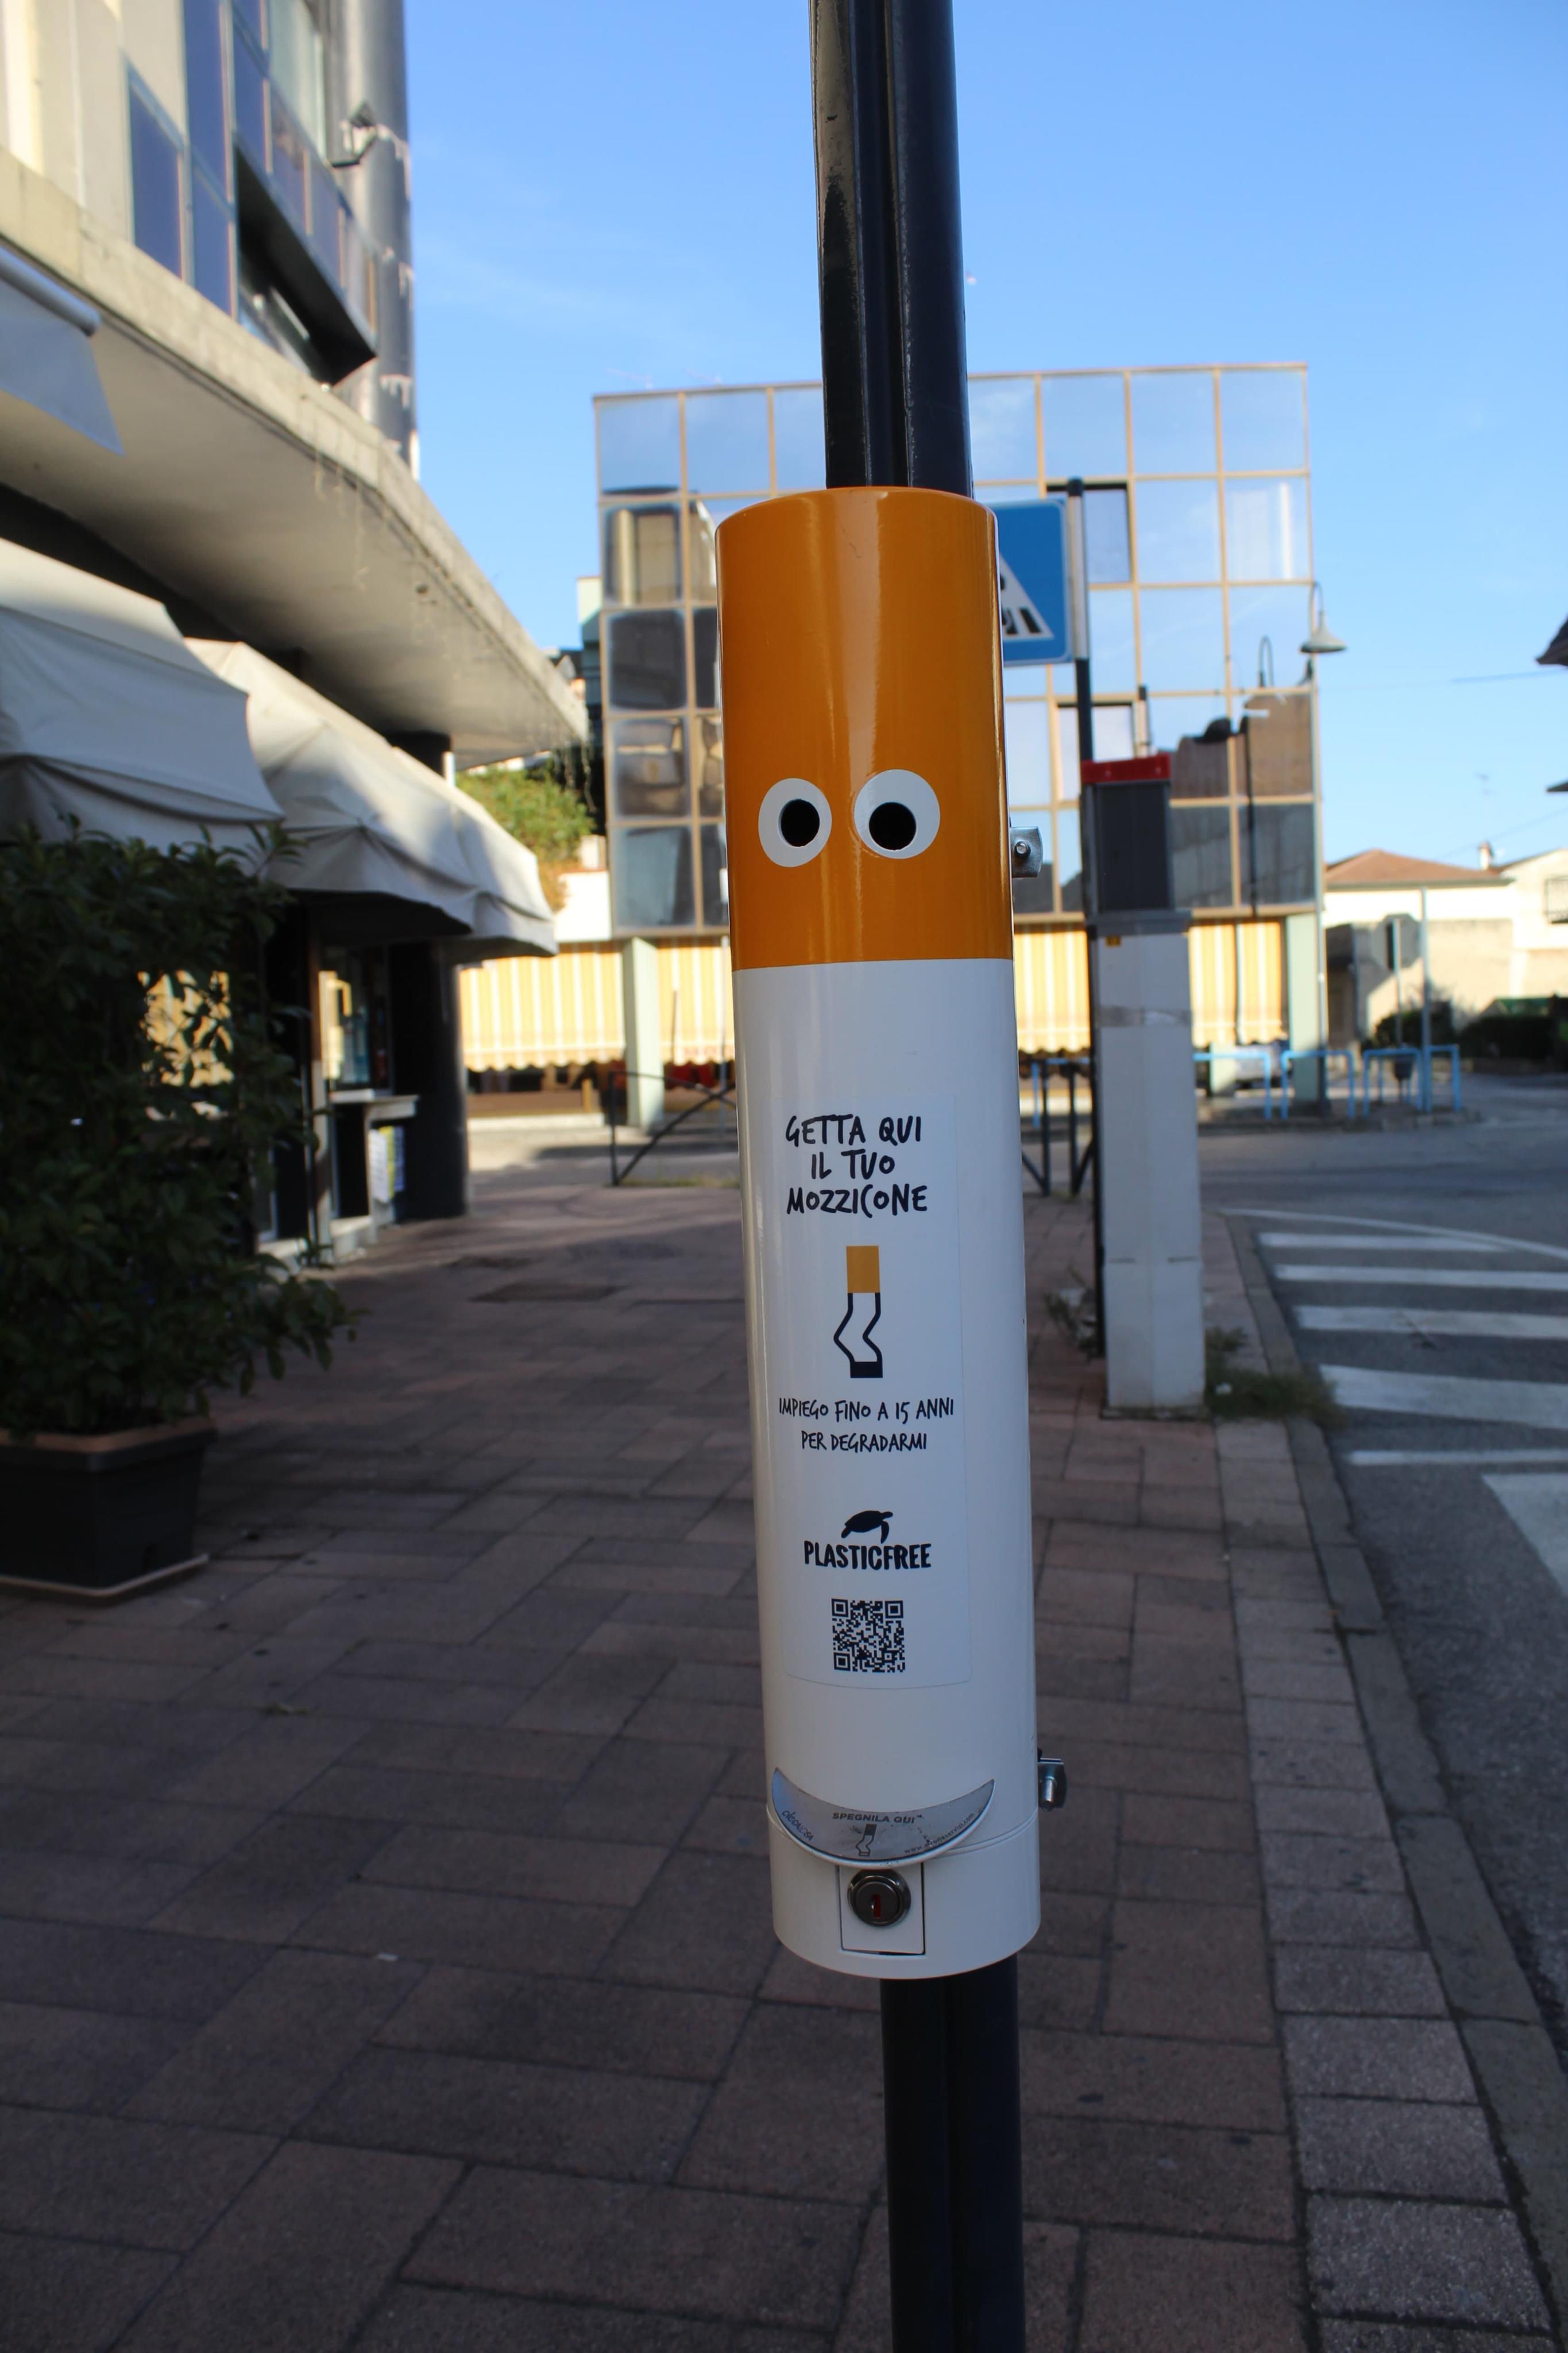 Example of a bin promoted by plastic free for proper disposal of cigarettes